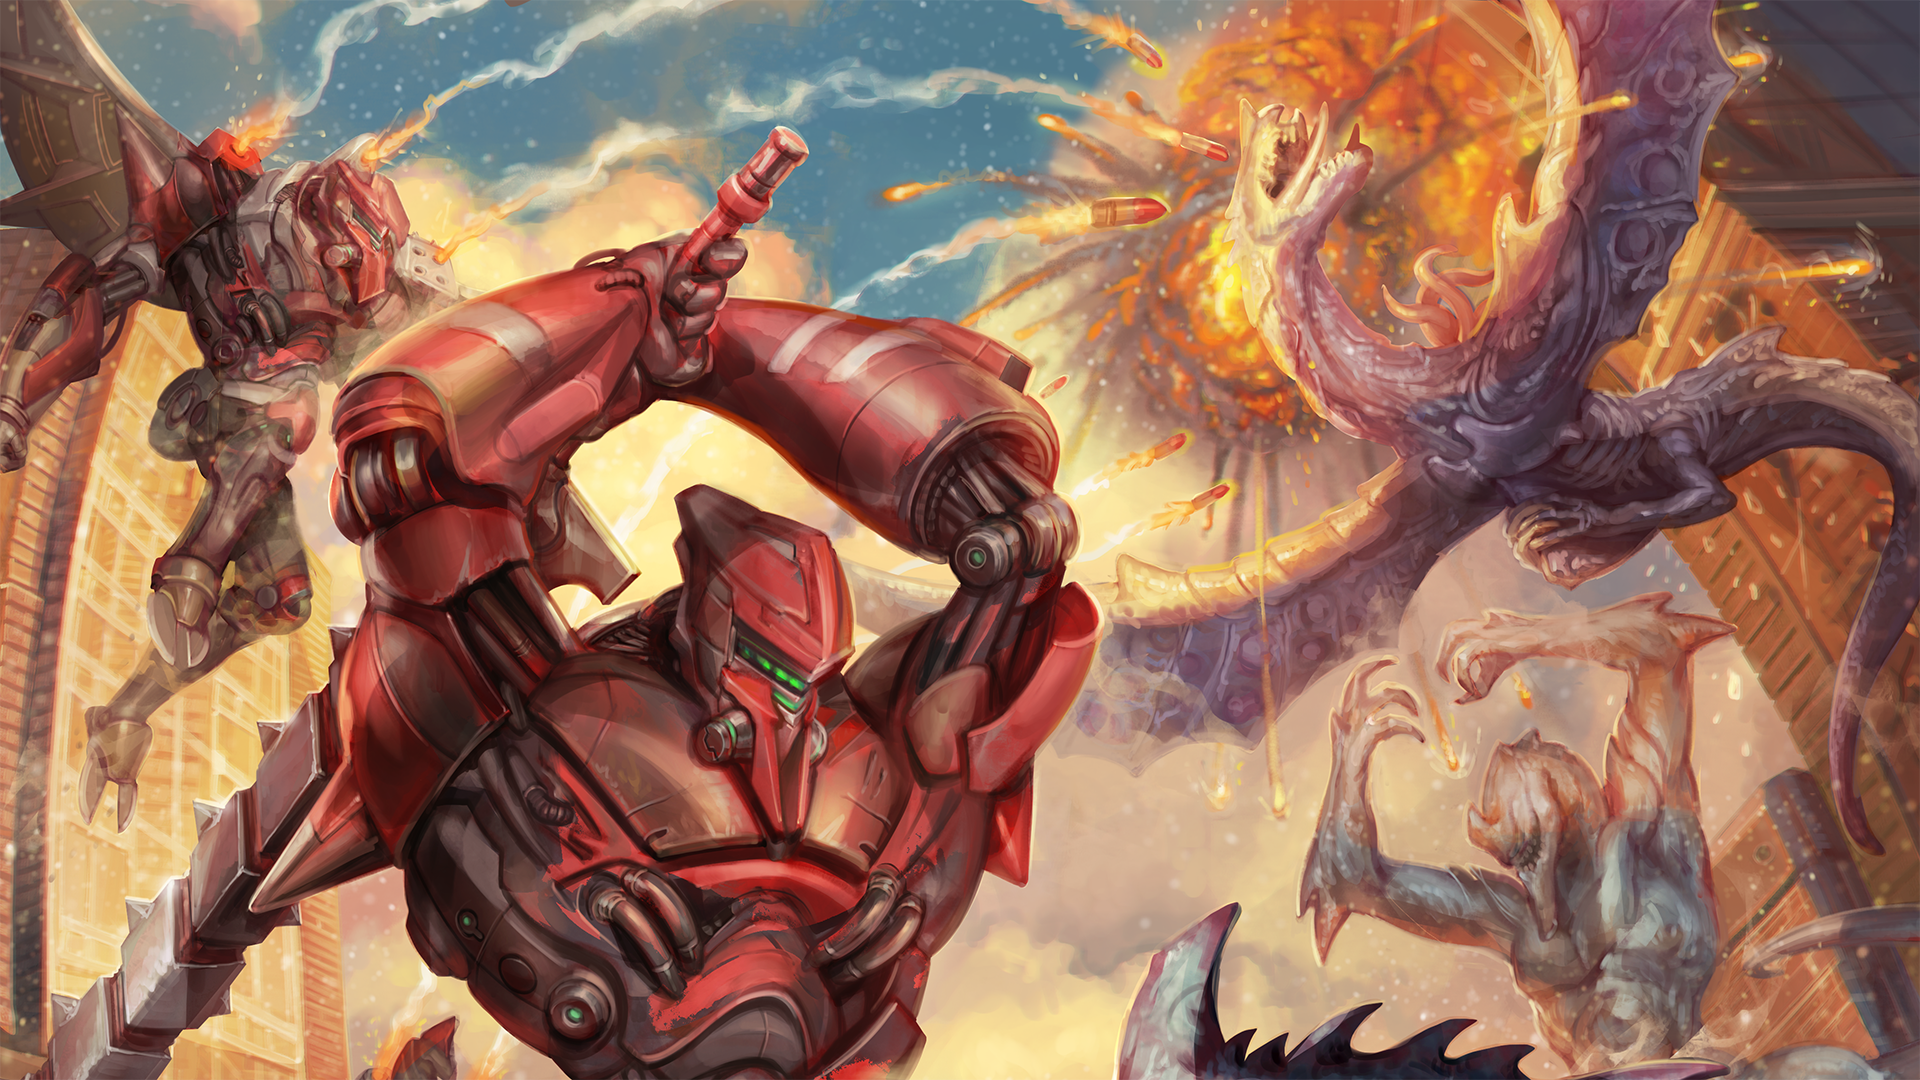 A large red mech swinging a giant sword down onto a kaiju